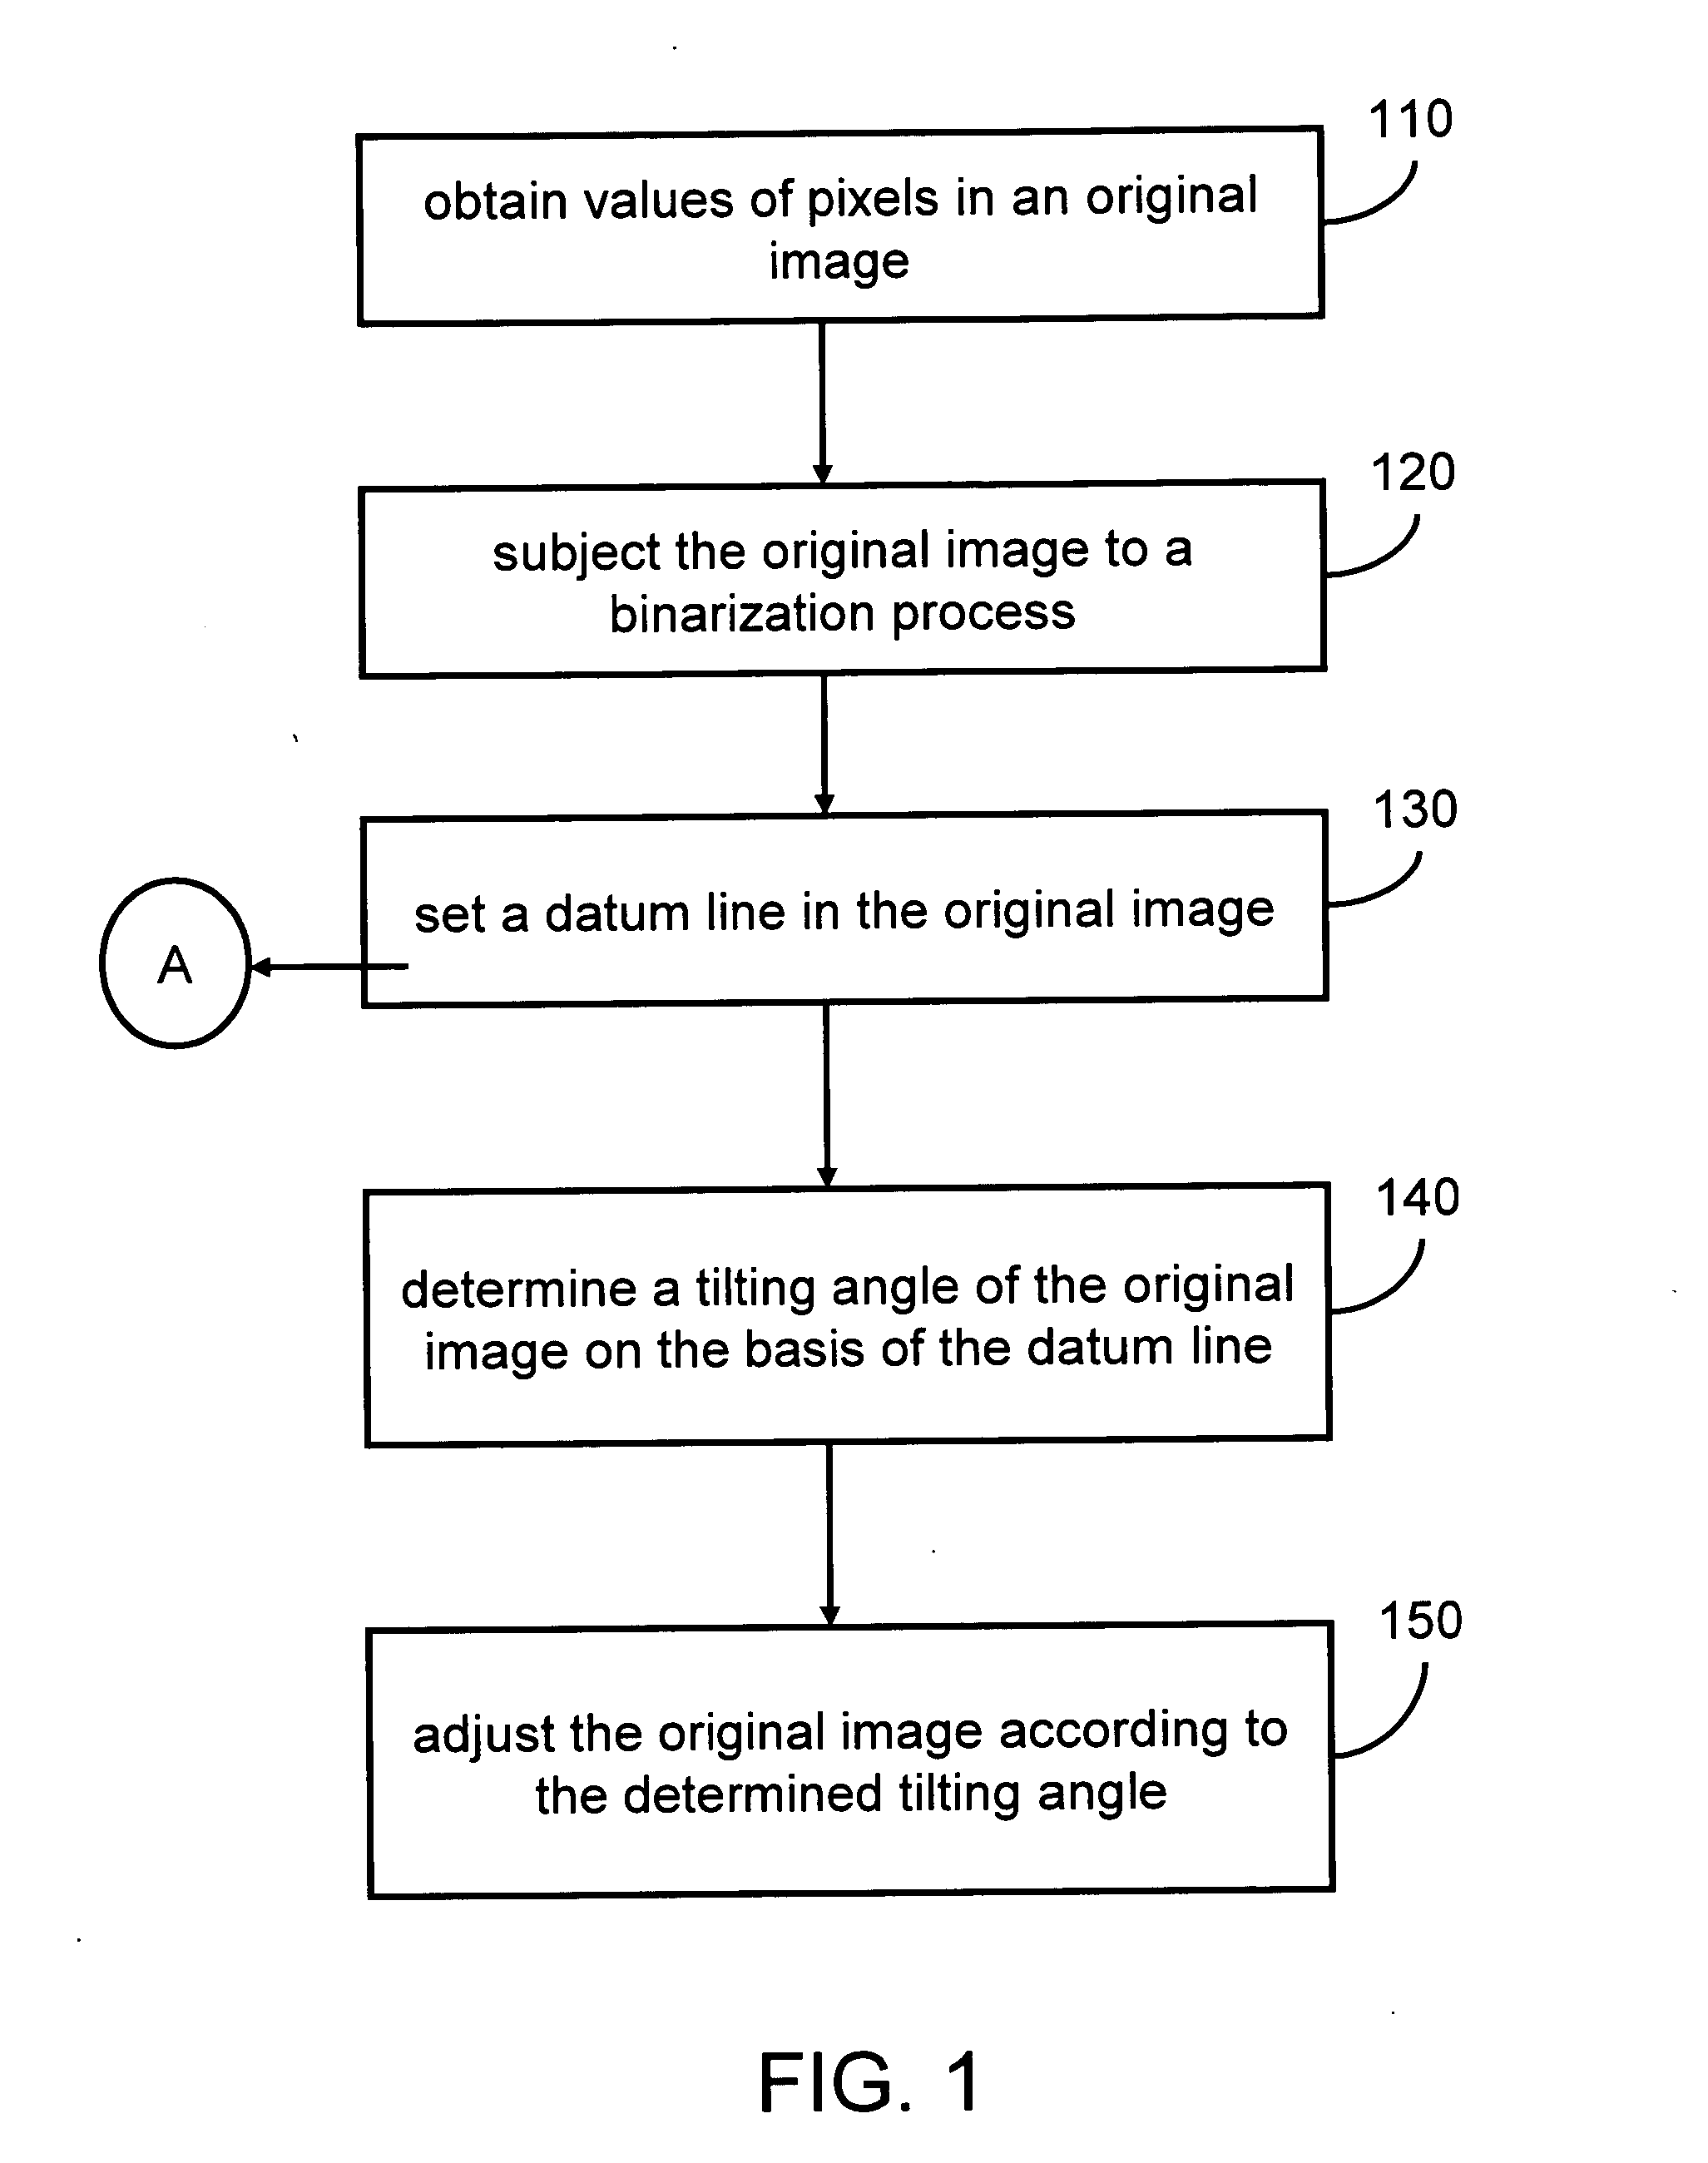 Method of auto-deskewing a tilted image